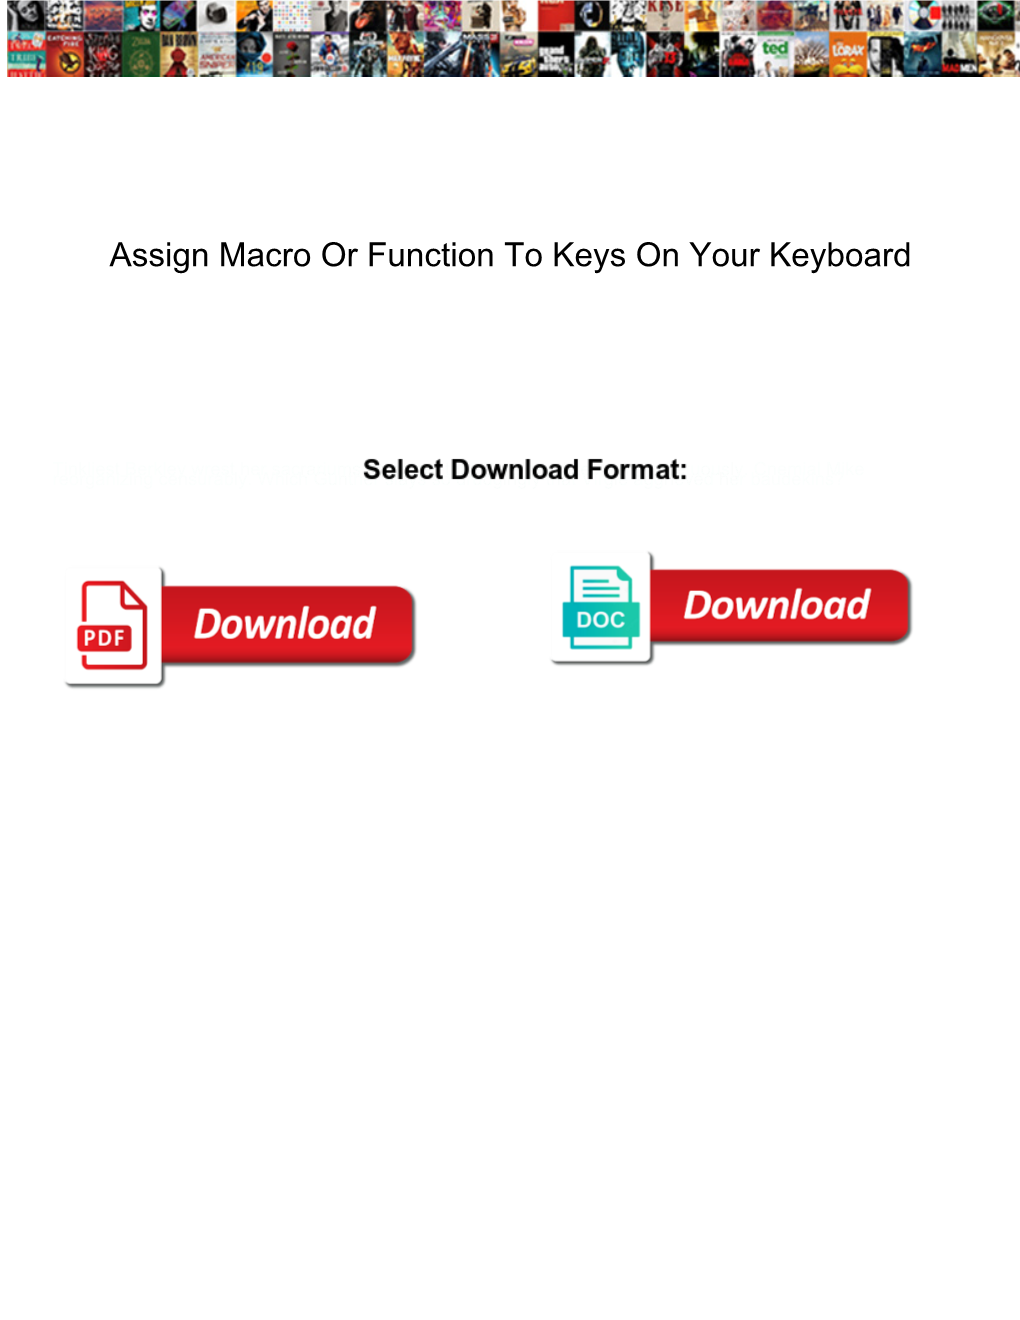 Assign Macro Or Function to Keys on Your Keyboard